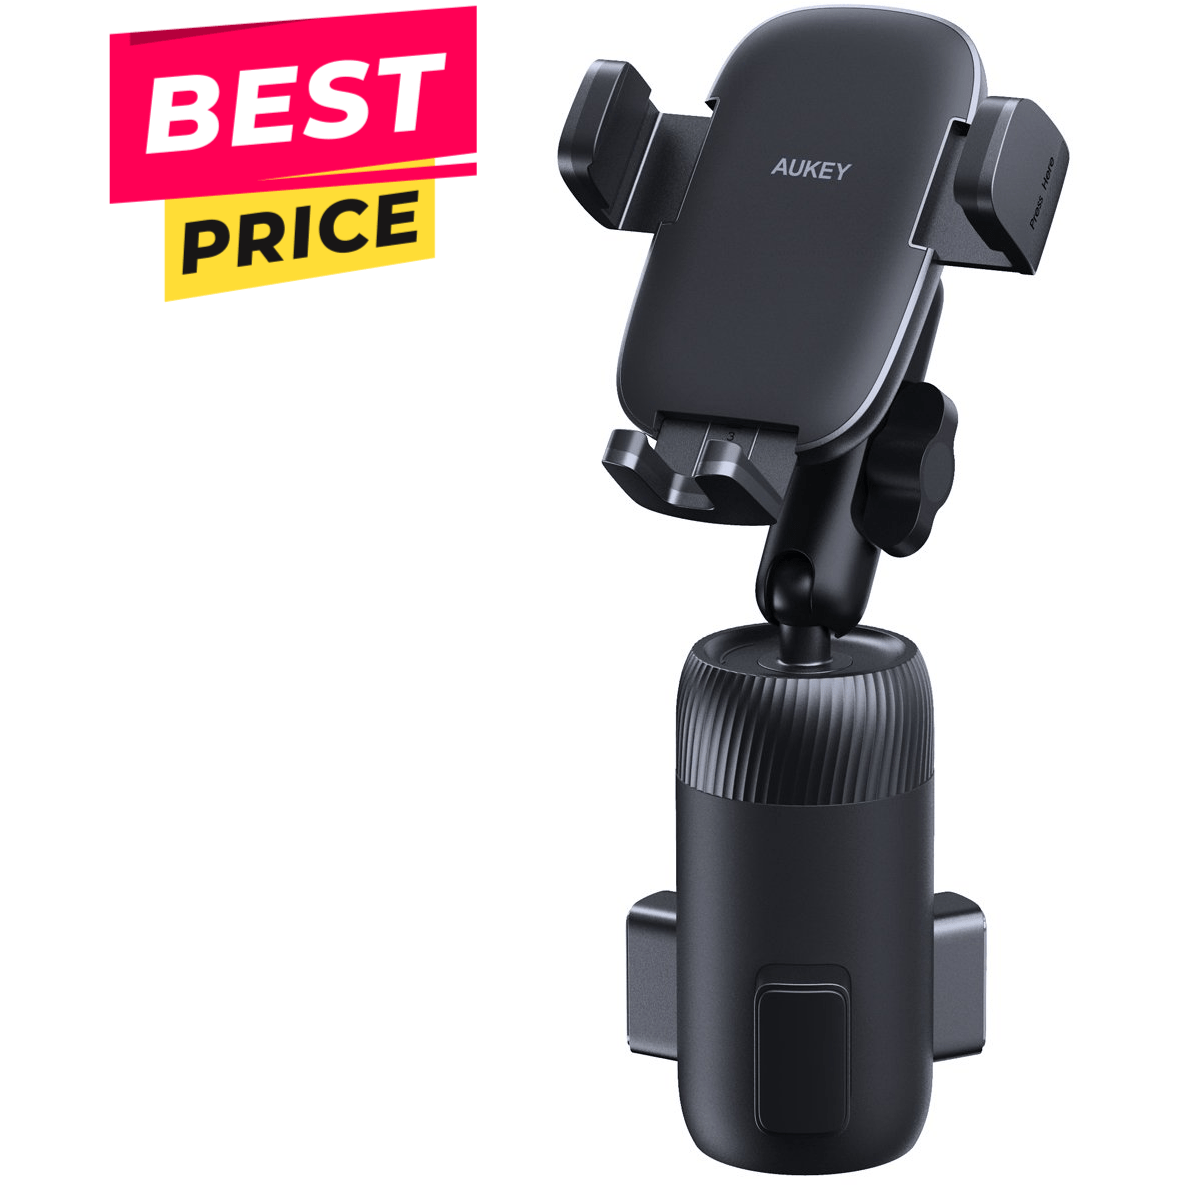 AUKEY Car Cup Holder Phone Mount Universal Adjustable Automobile HD C75